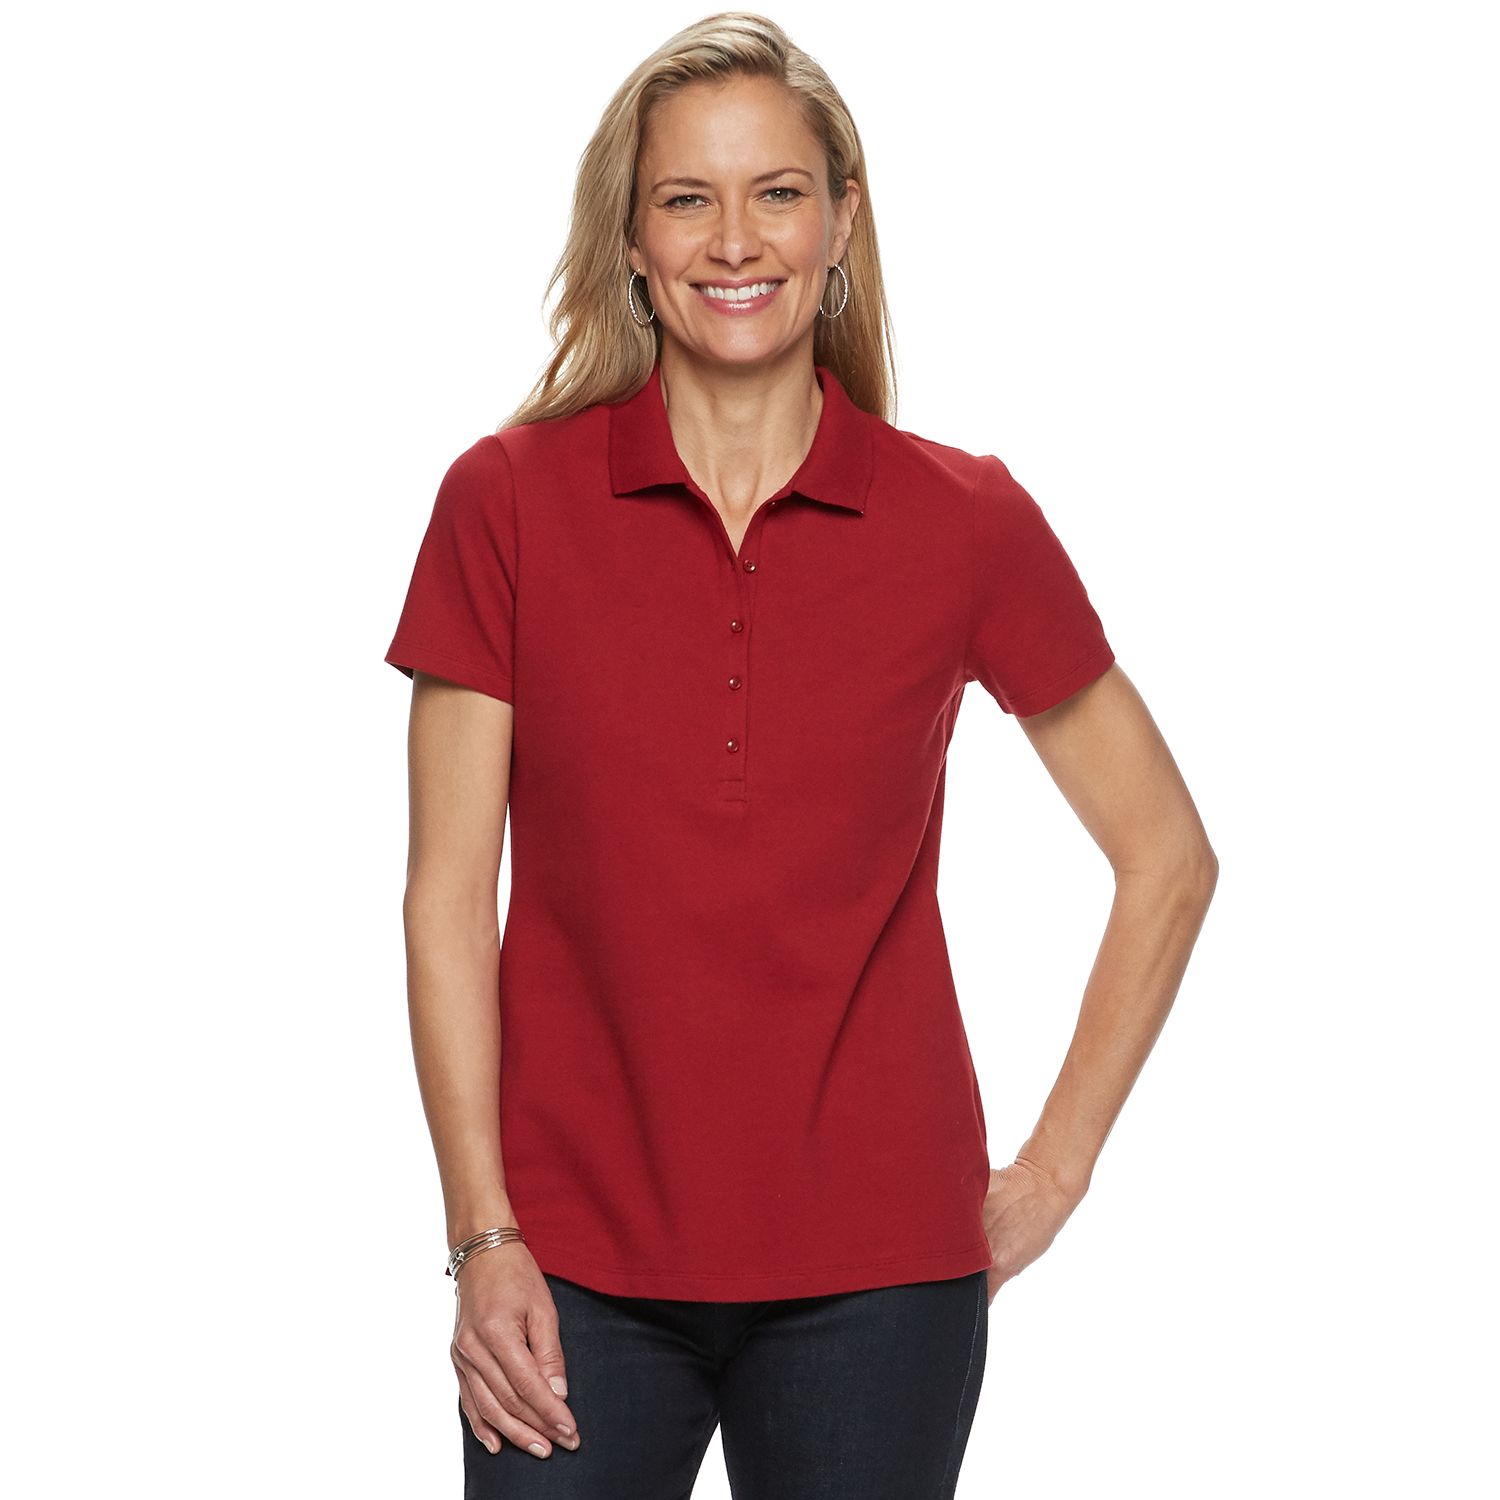 Women's Red Polos: Find all Your 